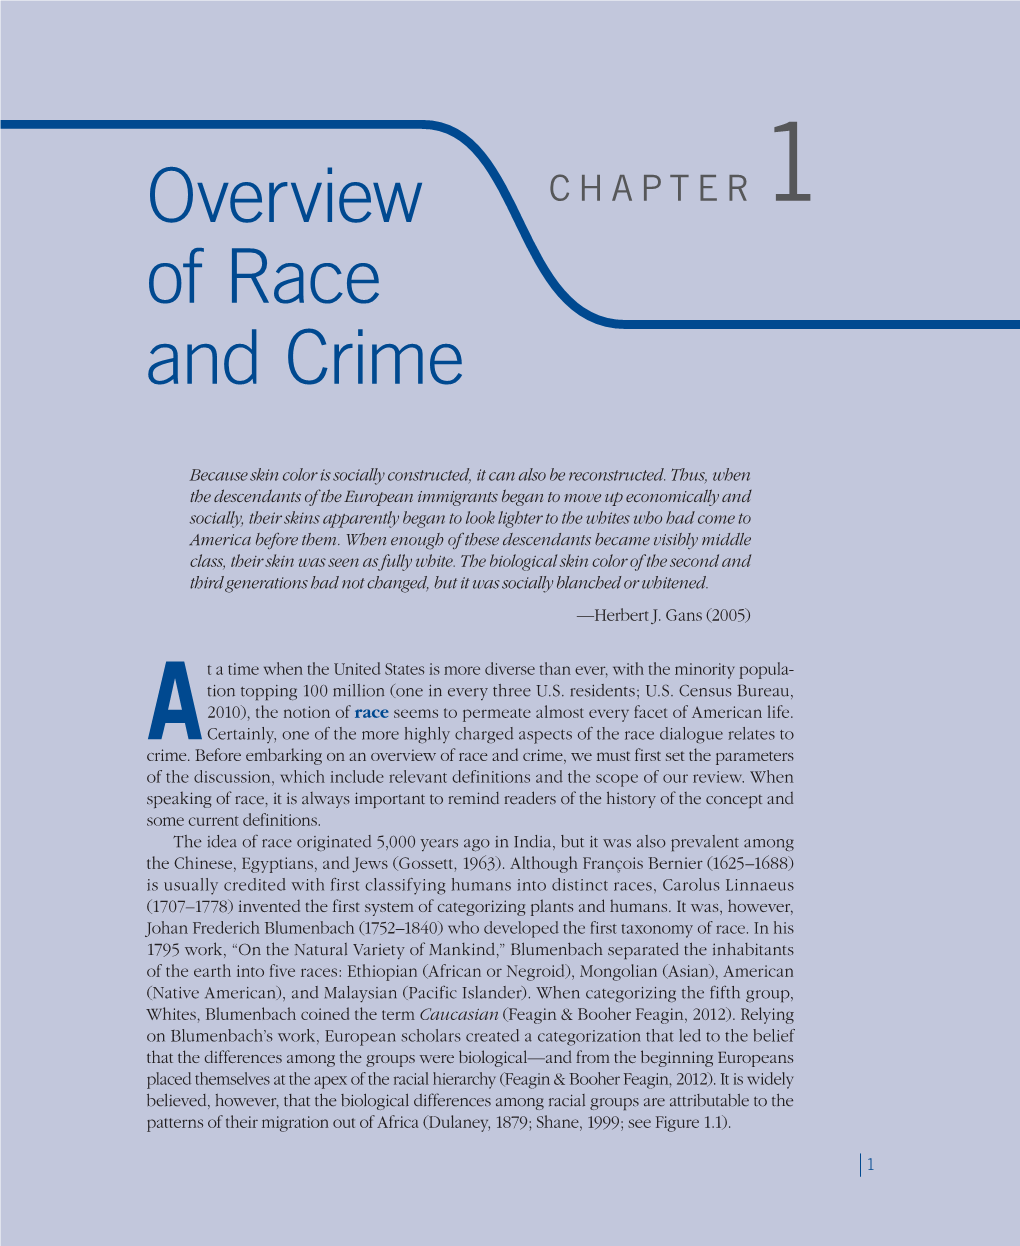 Overview of Race and Crime, We Must First Set the Parameters of the Discussion, Which Include Relevant Definitions and the Scope of Our Review